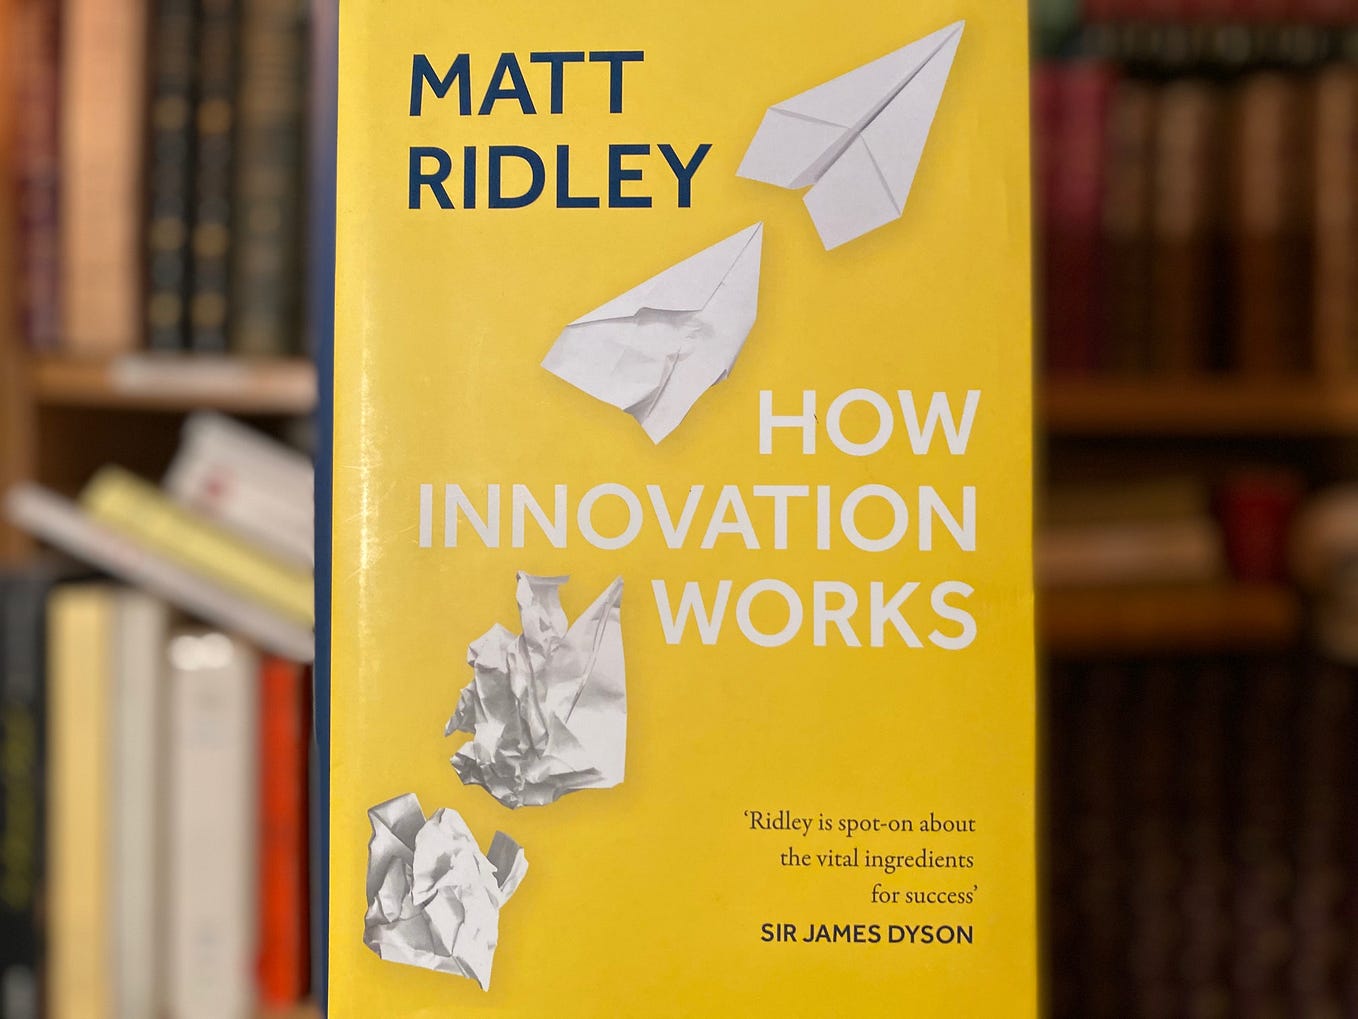 My 99 favorite quotes from “How Innovation Works” by Matt Ridley